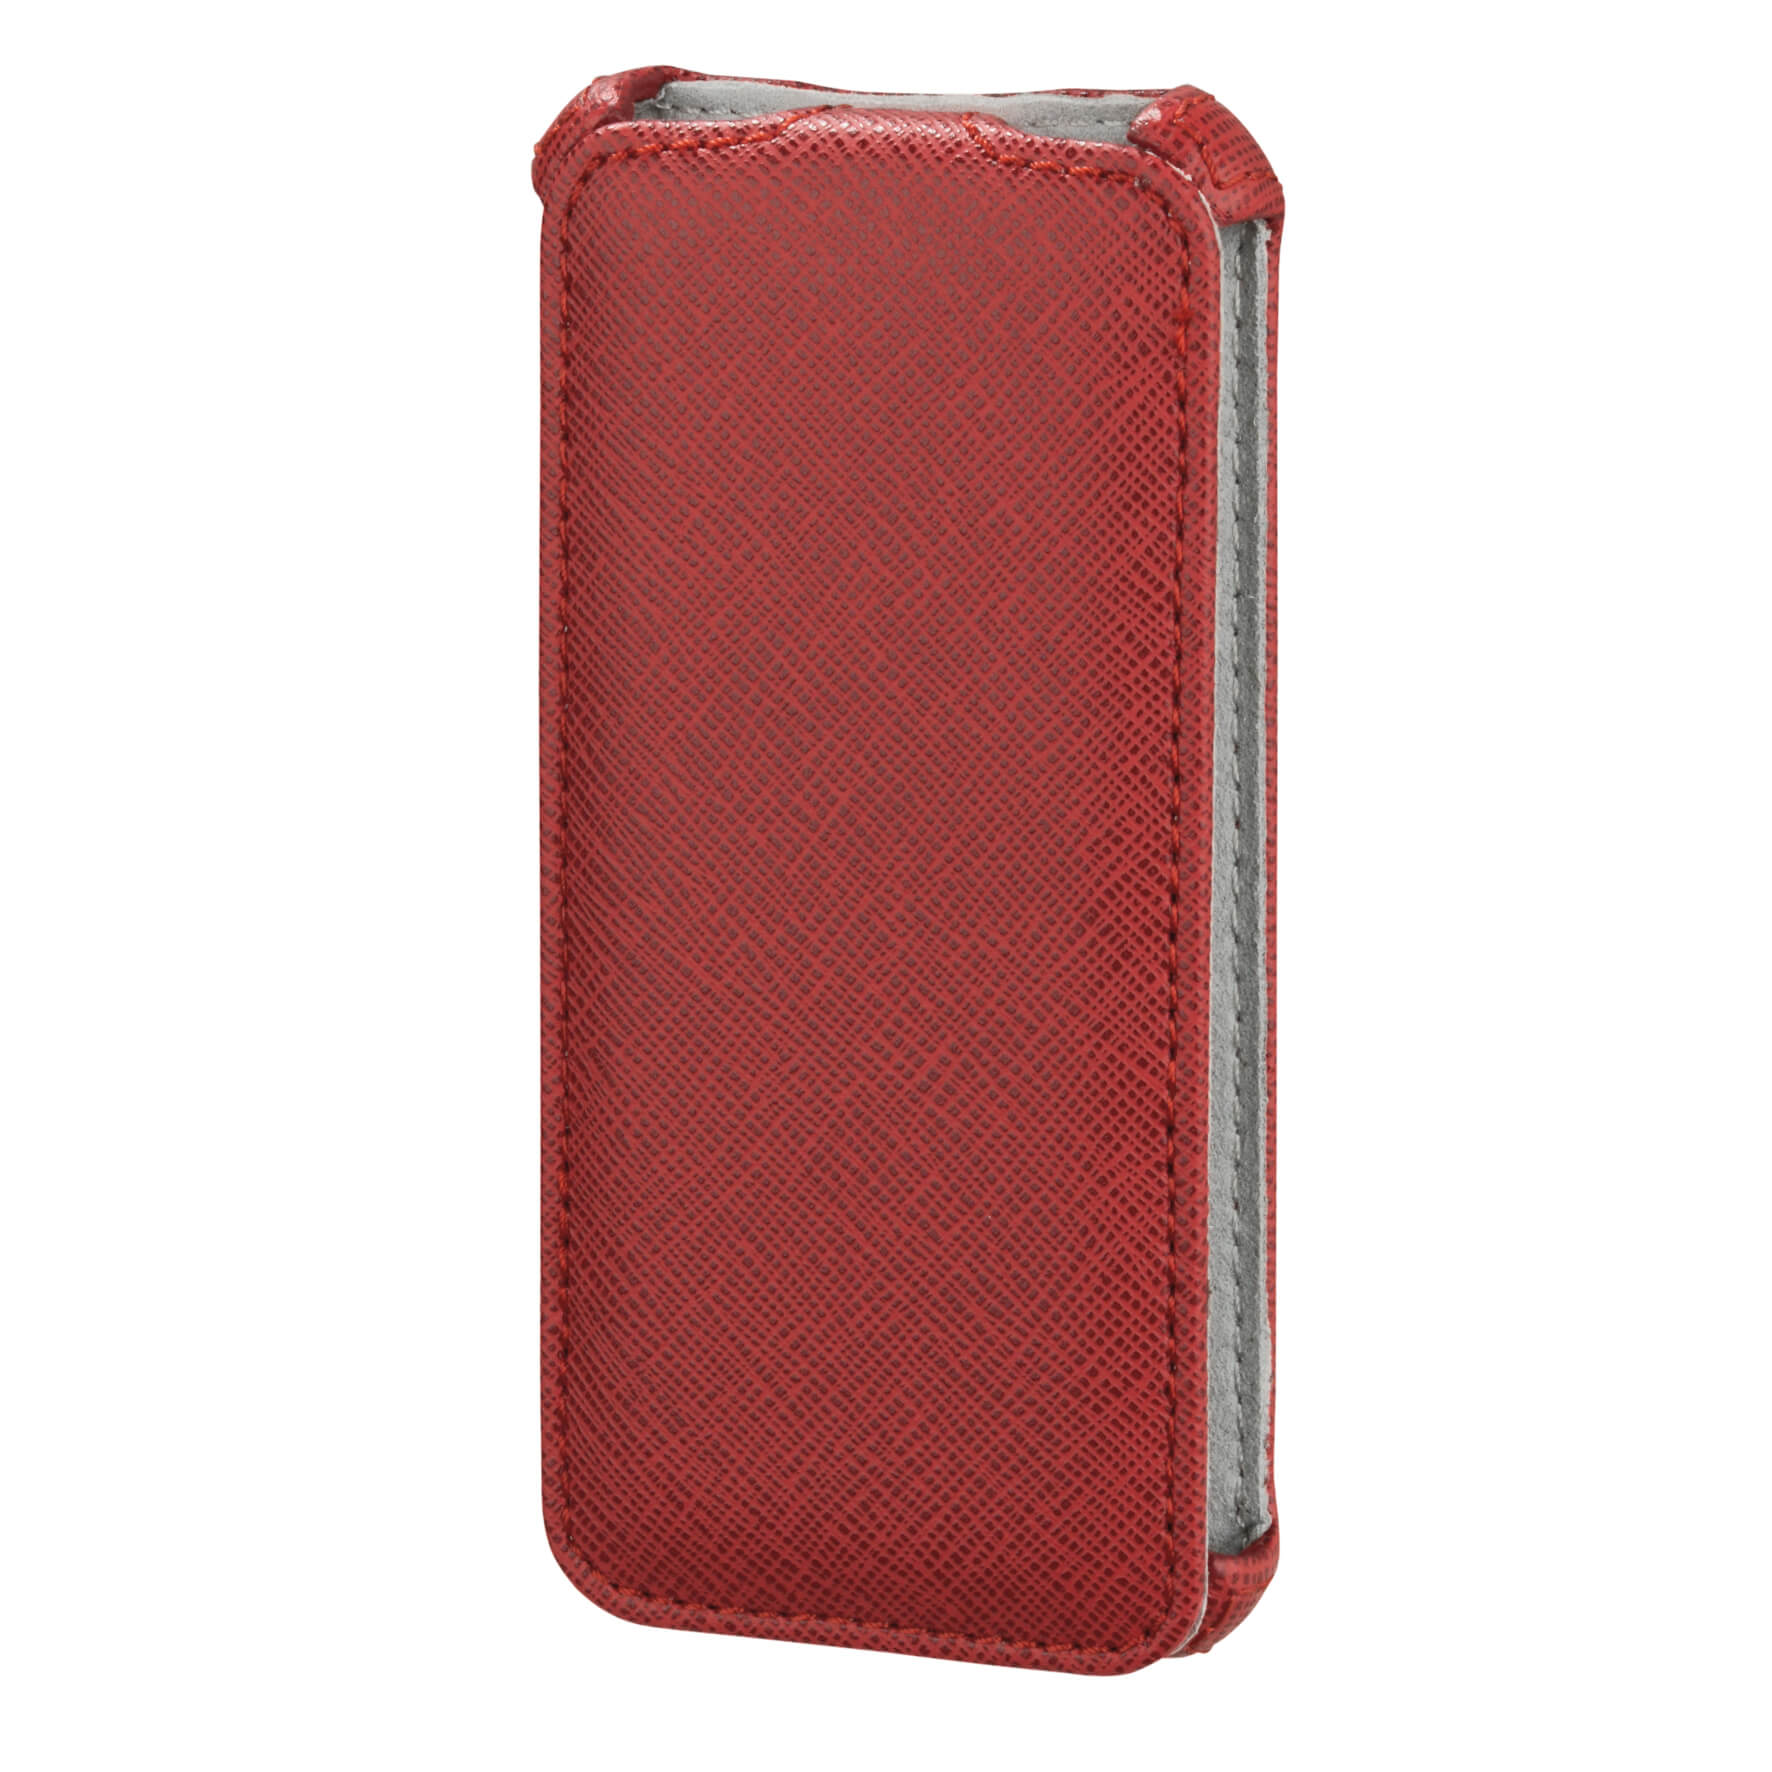 Flap Case Flap Case for Apple iPhone 5/5s/SE, red